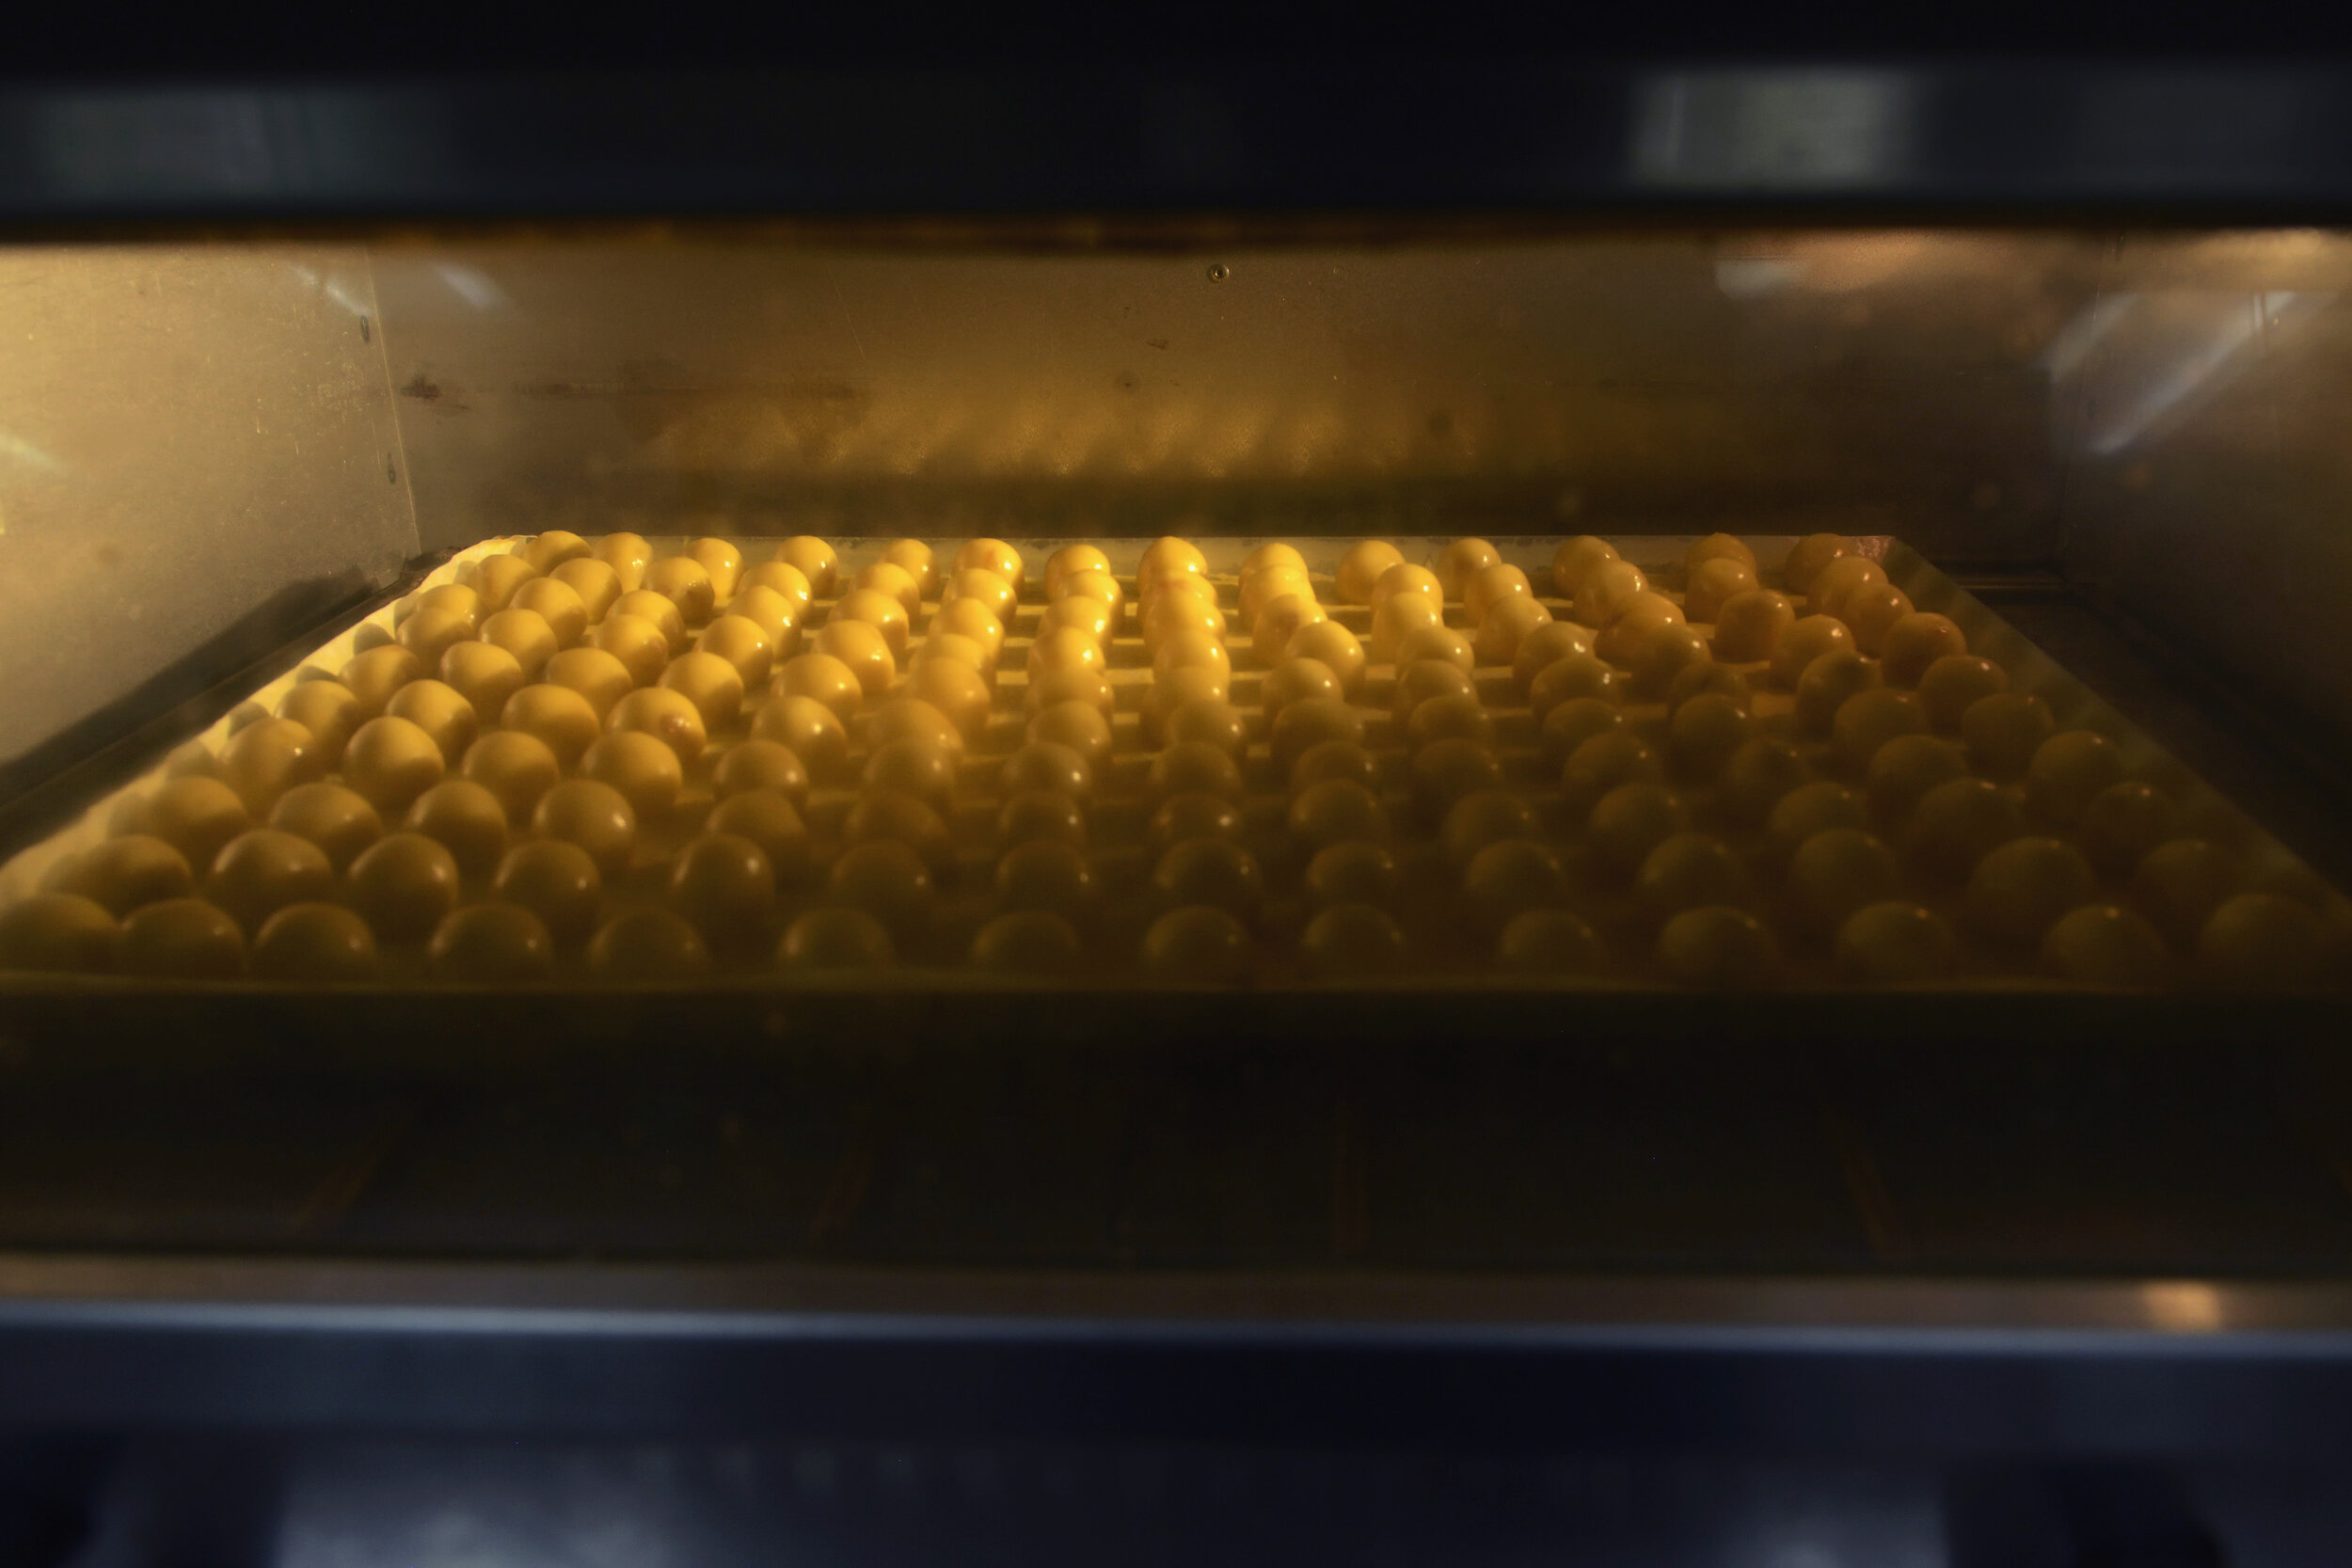   Pineapple tarts sit in an oven at the central kitchen of traditional Peranakan confectionery HarriAnns in Singapore April 20, 2018. 